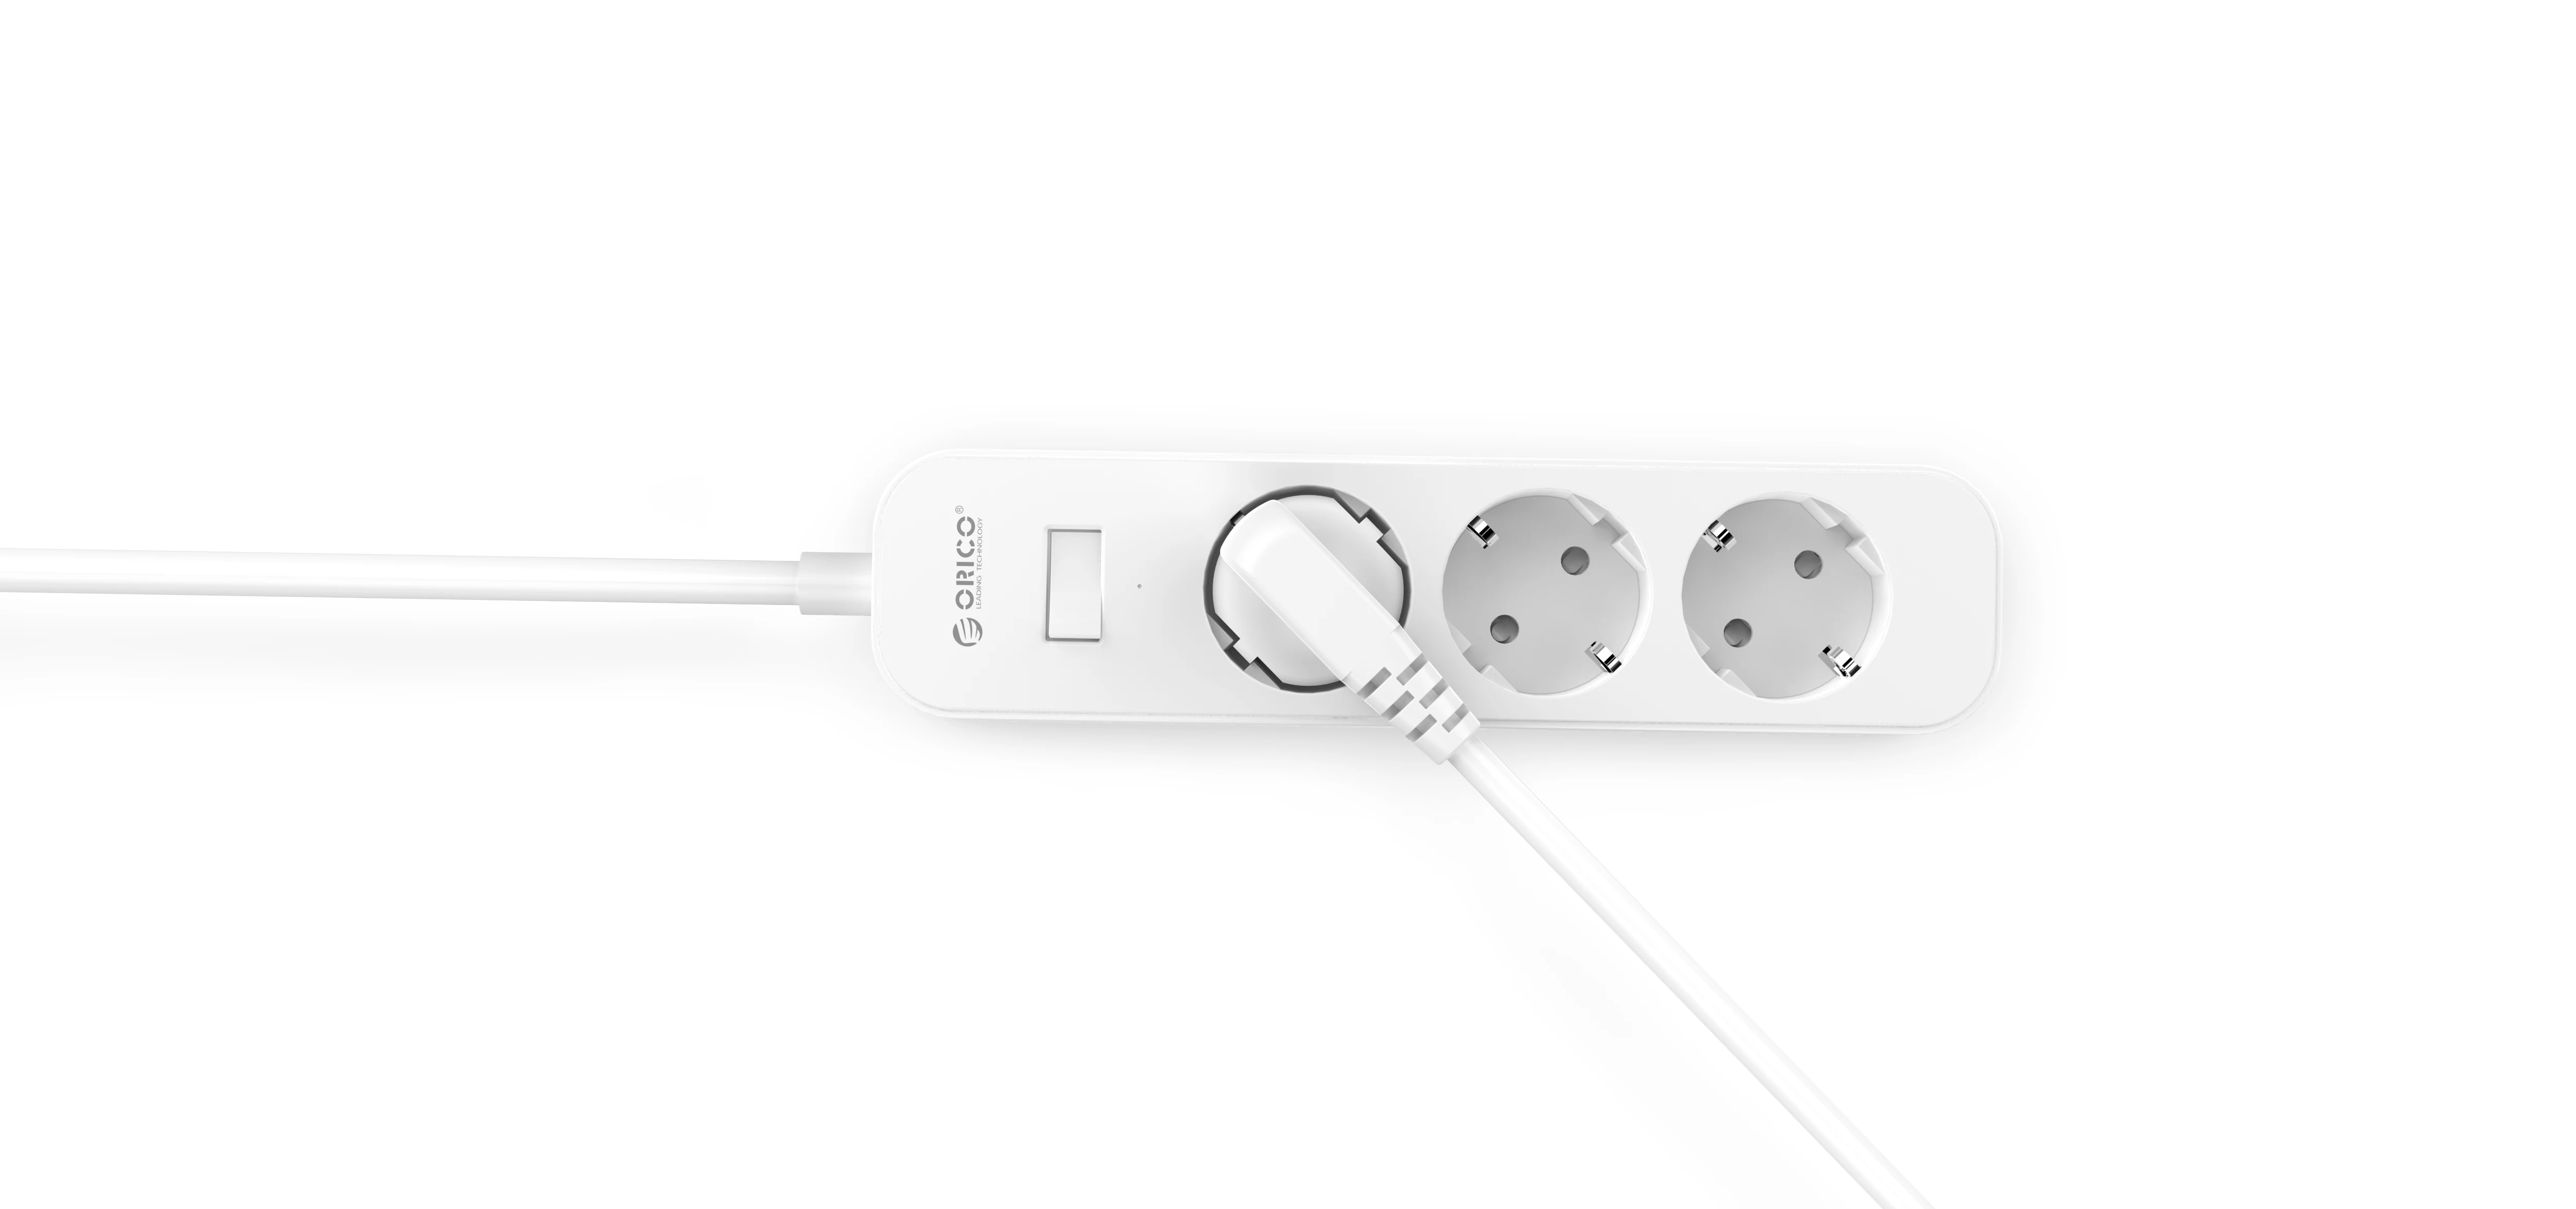 3 AC outlet extension socket without USB power strip with overload protection